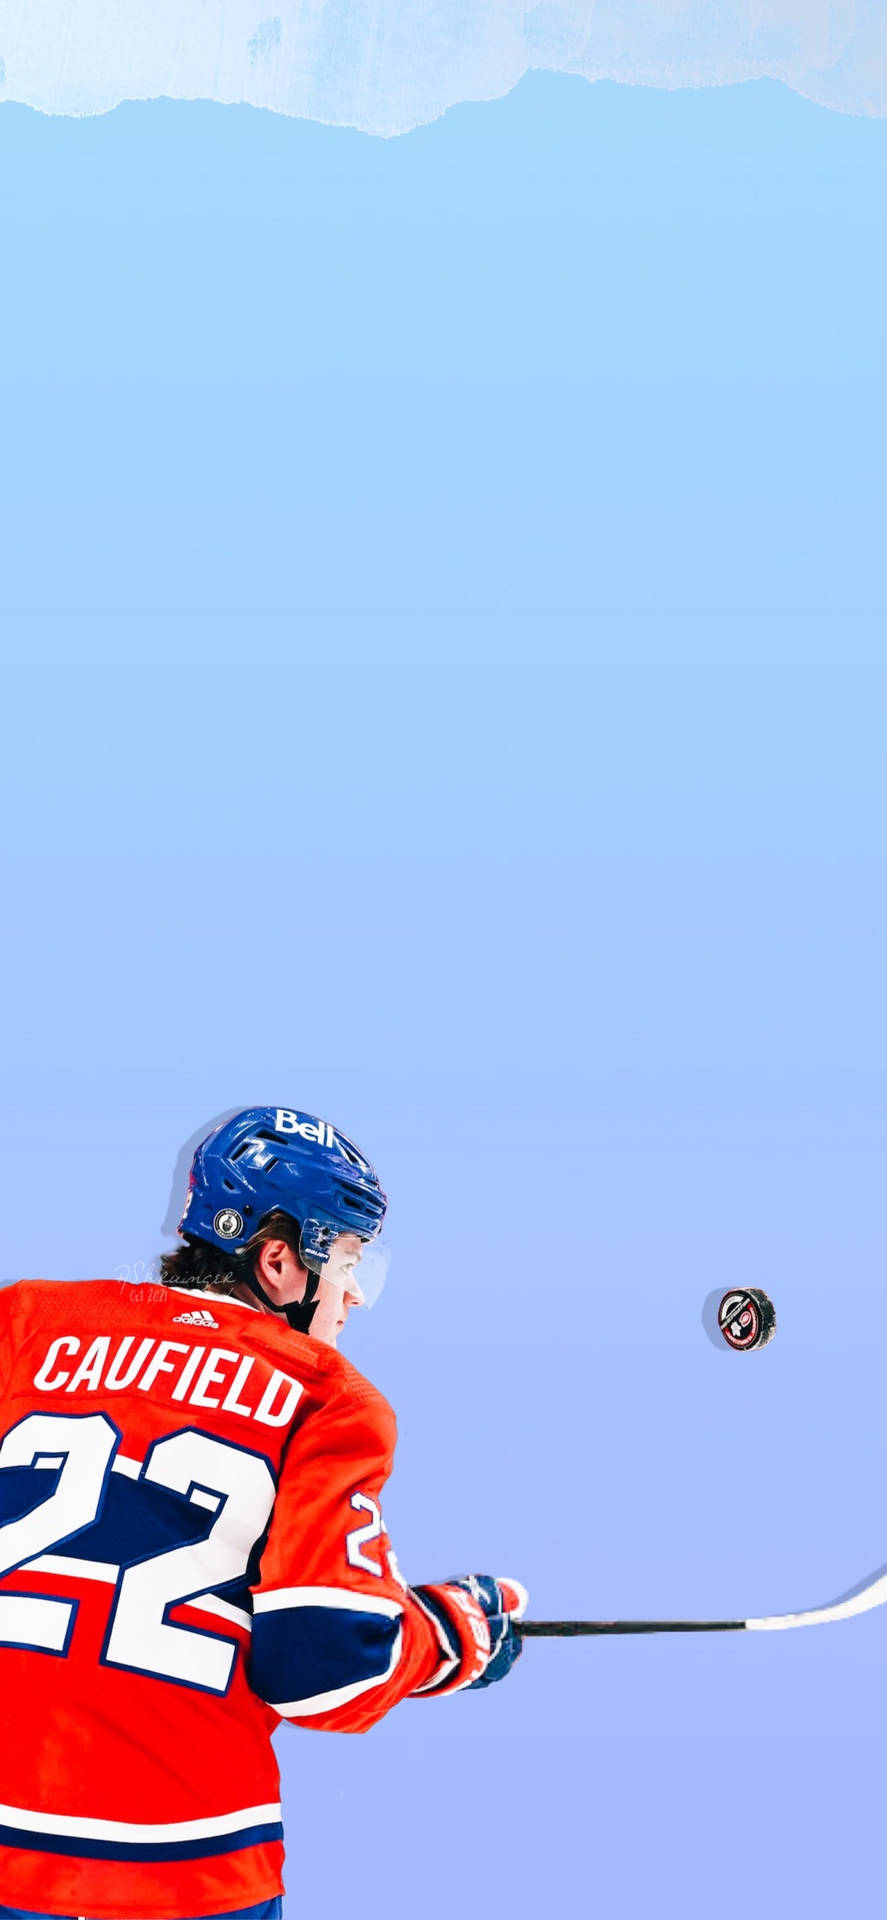 Colecaufield, Amerikansk Ishockeyspelare. (this Would Be The Translation For A Wallpaper That Includes An Image Of Cole Caufield With His Name And Occupation Listed Underneath In Swedish). Wallpaper